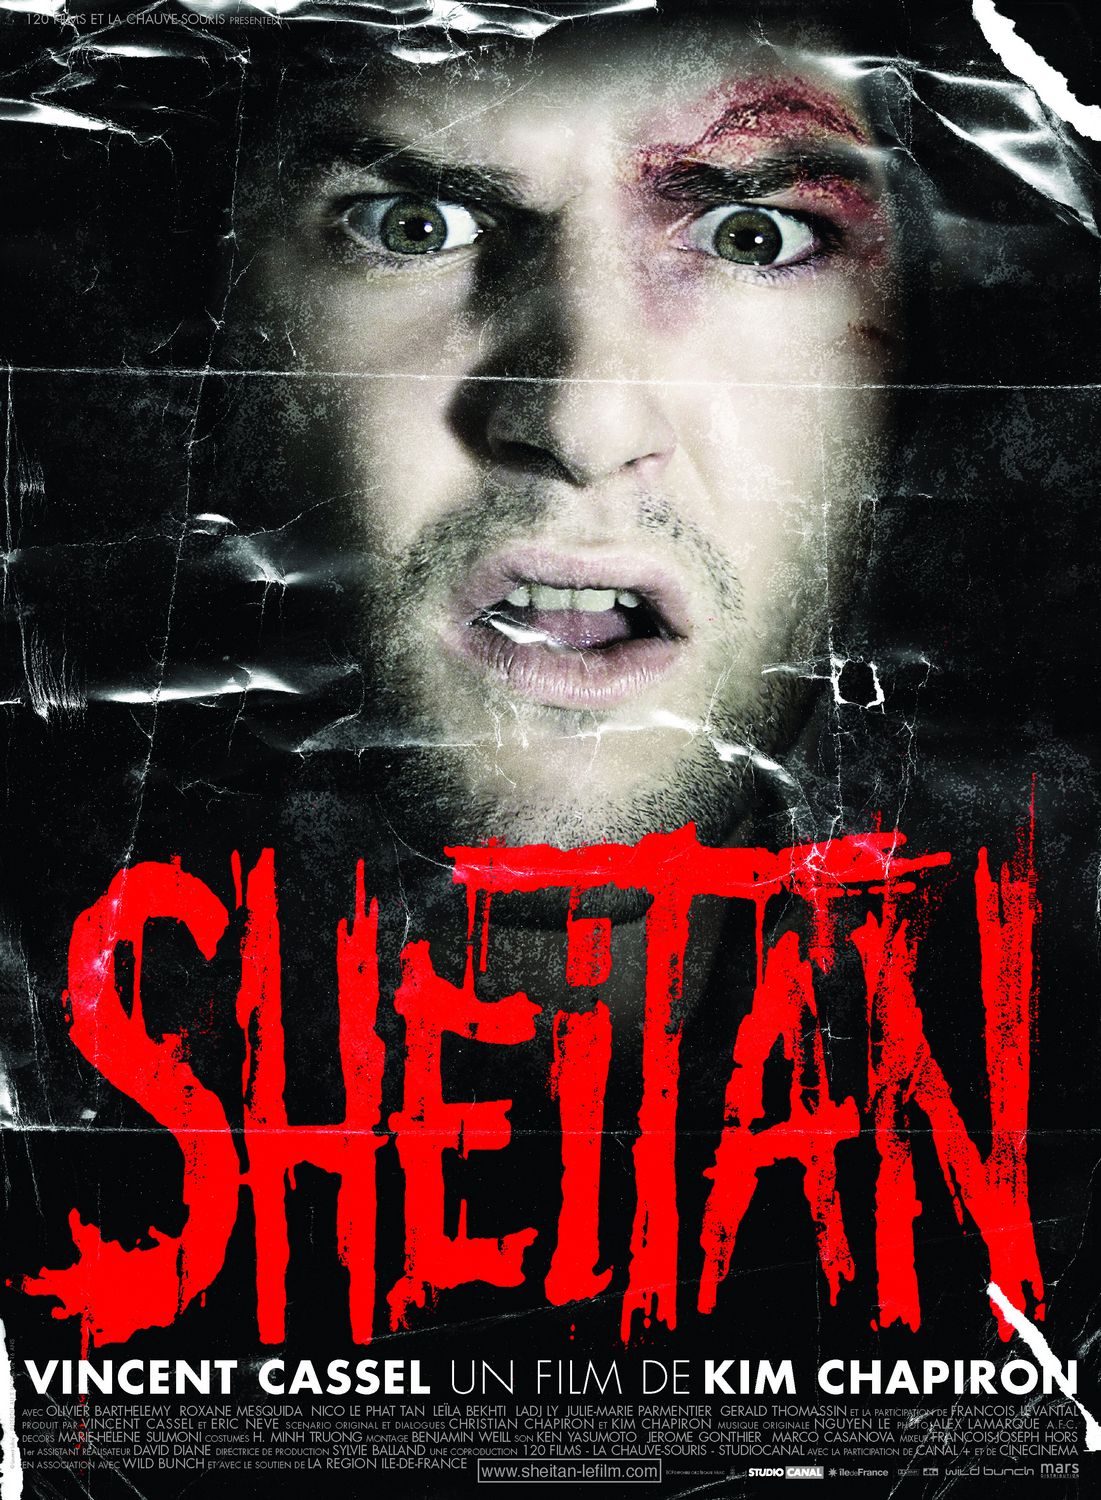 Extra Large Movie Poster Image for Sheitan (#4 of 5)